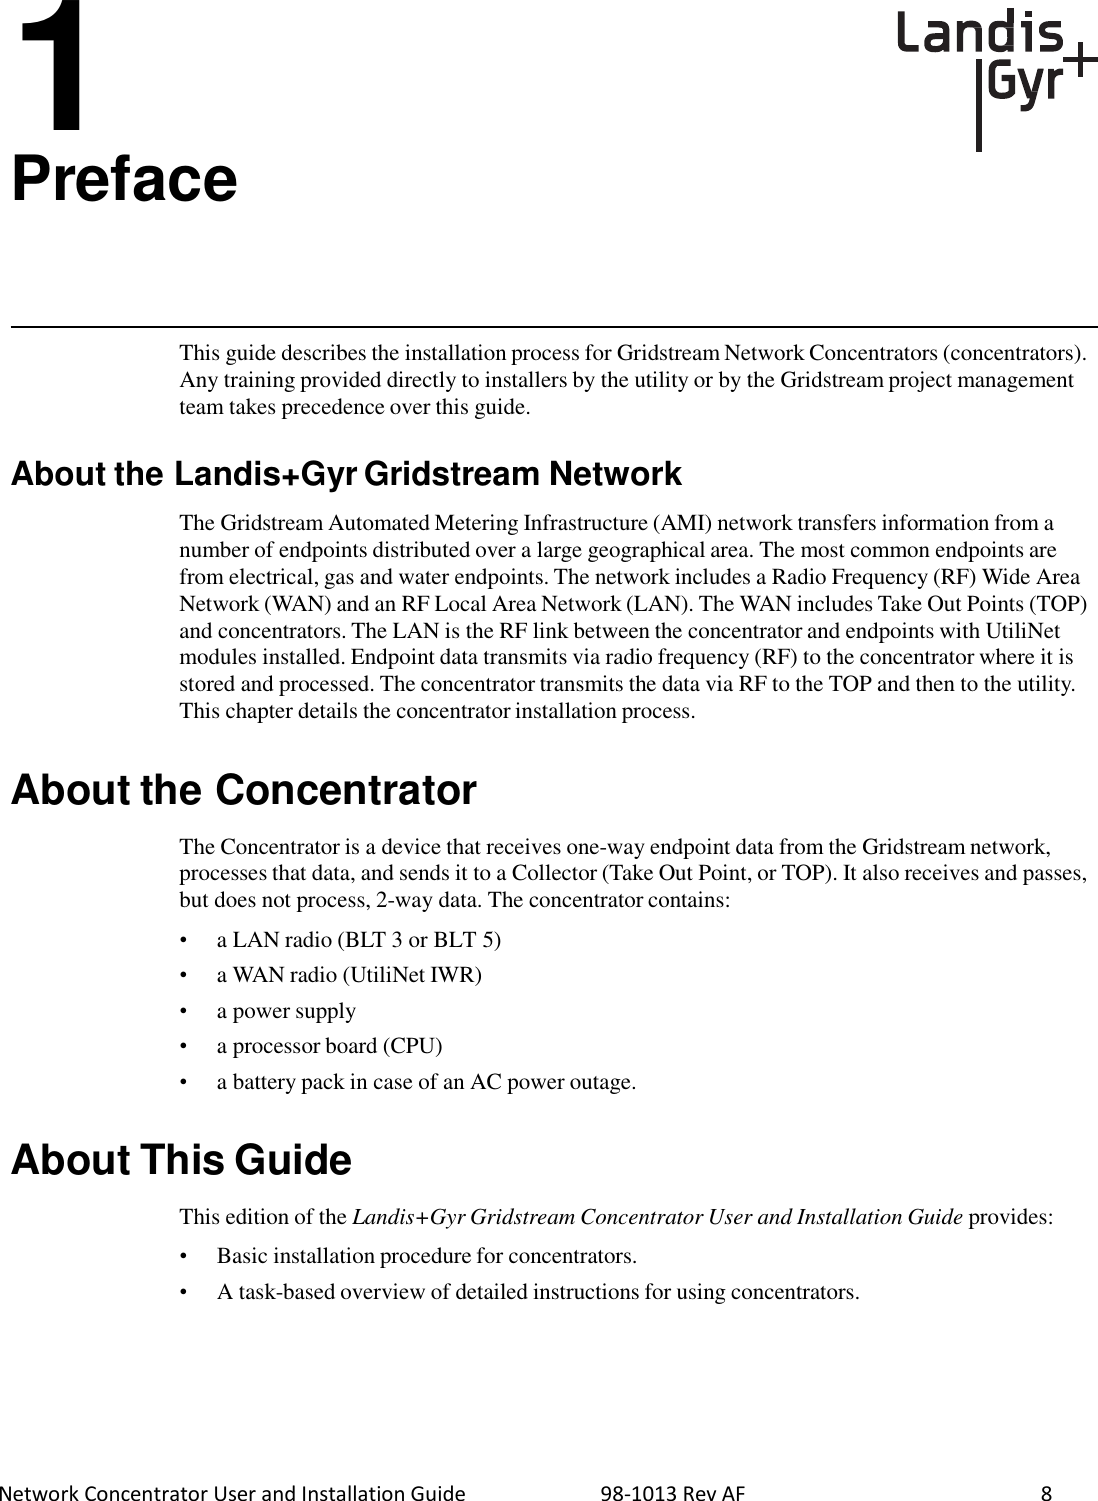  Network Concentrator User and Installation Guide                          98-1013 Rev AF               8 1 Preface       This guide describes the installation process for Gridstream Network Concentrators (concentrators). Any training provided directly to installers by the utility or by the Gridstream project management team takes precedence over this guide.   About the Landis+Gyr Gridstream Network  The Gridstream Automated Metering Infrastructure (AMI) network transfers information from a number of endpoints distributed over a large geographical area. The most common endpoints are from electrical, gas and water endpoints. The network includes a Radio Frequency (RF) Wide Area Network (WAN) and an RF Local Area Network (LAN). The WAN includes Take Out Points (TOP) and concentrators. The LAN is the RF link between the concentrator and endpoints with UtiliNet modules installed. Endpoint data transmits via radio frequency (RF) to the concentrator where it is stored and processed. The concentrator transmits the data via RF to the TOP and then to the utility. This chapter details the concentrator installation process.   About the Concentrator  The Concentrator is a device that receives one-way endpoint data from the Gridstream network, processes that data, and sends it to a Collector (Take Out Point, or TOP). It also receives and passes, but does not process, 2-way data. The concentrator contains:  •  a LAN radio (BLT 3 or BLT 5) •  a WAN radio (UtiliNet IWR) •  a power supply •  a processor board (CPU) •  a battery pack in case of an AC power outage.   About This Guide  This edition of the Landis+Gyr Gridstream Concentrator User and Installation Guide provides:  •  Basic installation procedure for concentrators. •  A task-based overview of detailed instructions for using concentrators. 